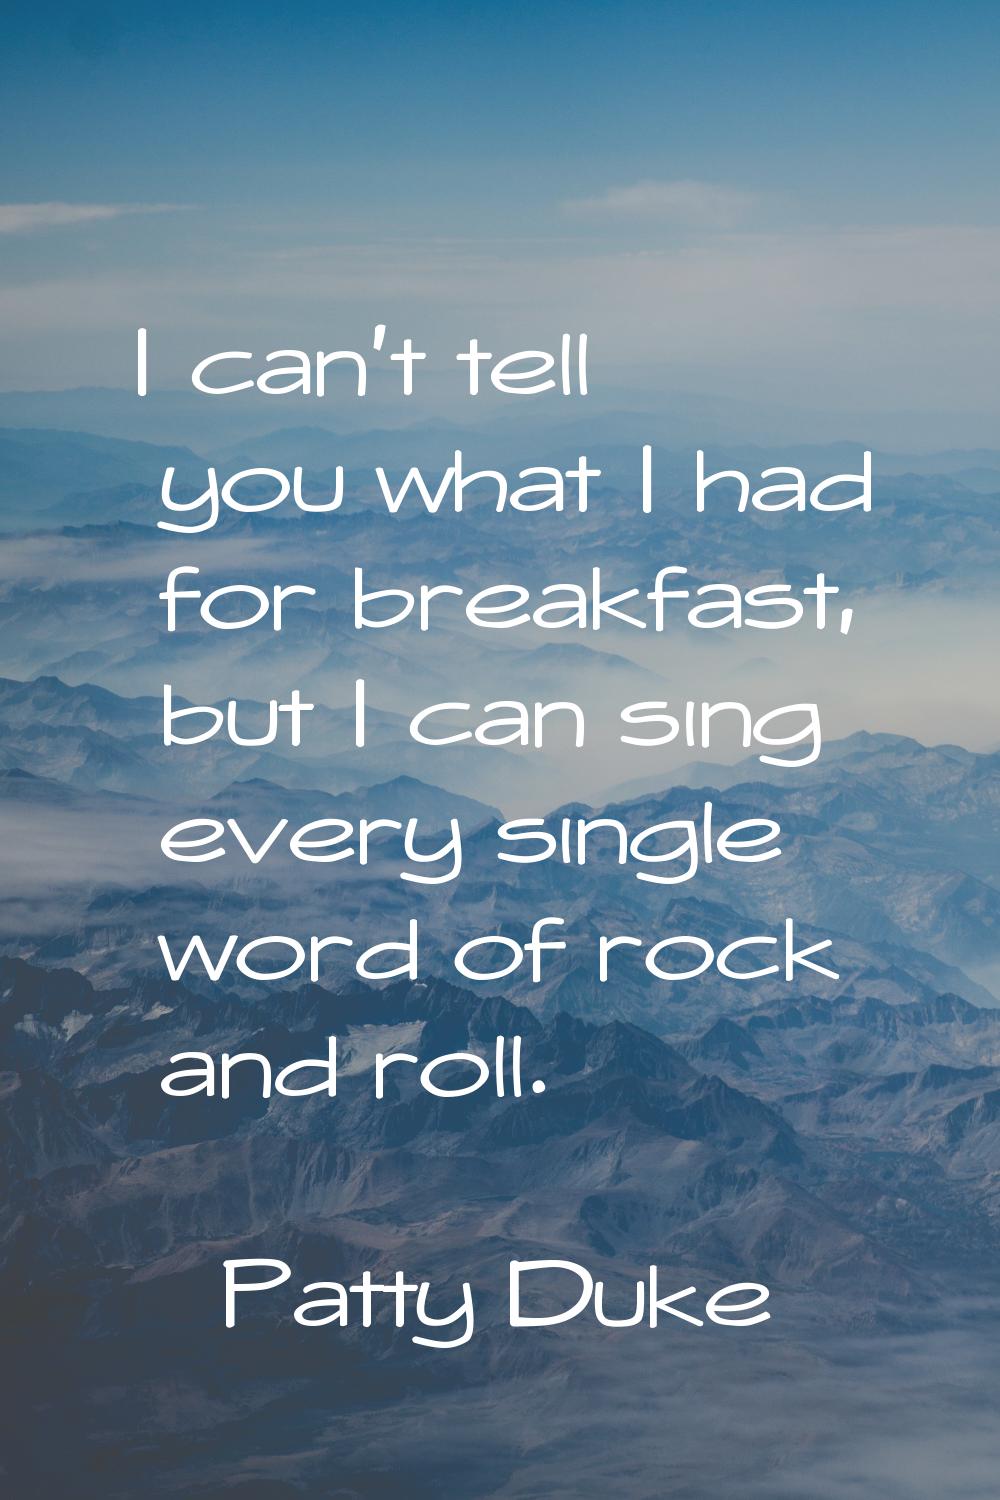 I can't tell you what I had for breakfast, but I can sing every single word of rock and roll.